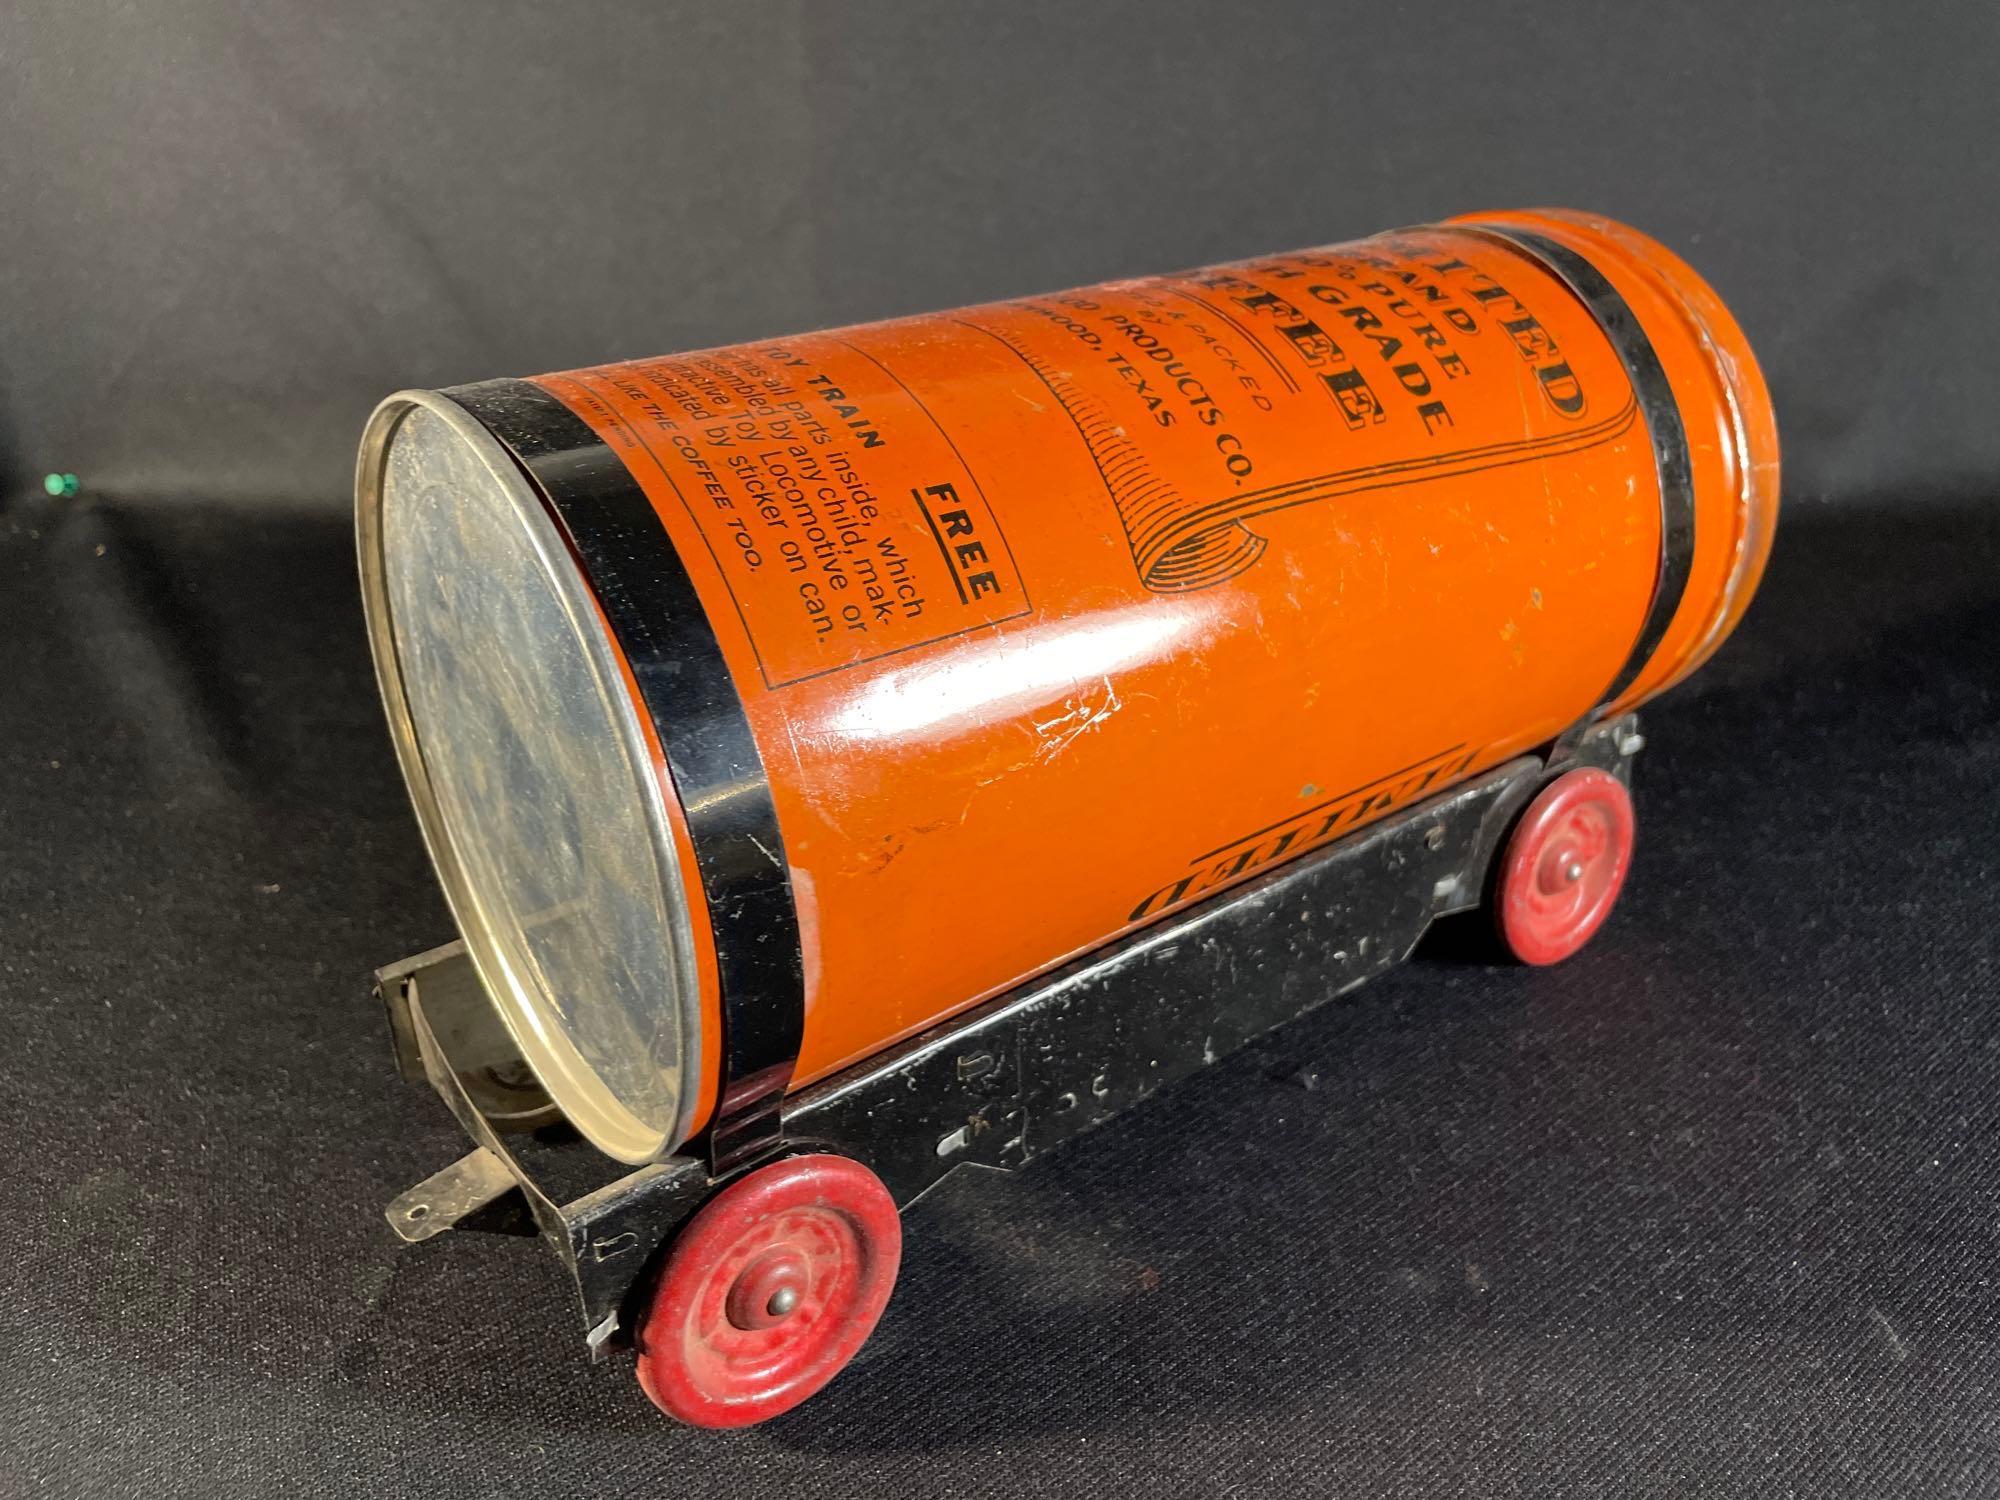 Antique Tasty Food Products CO. coffee tin train set